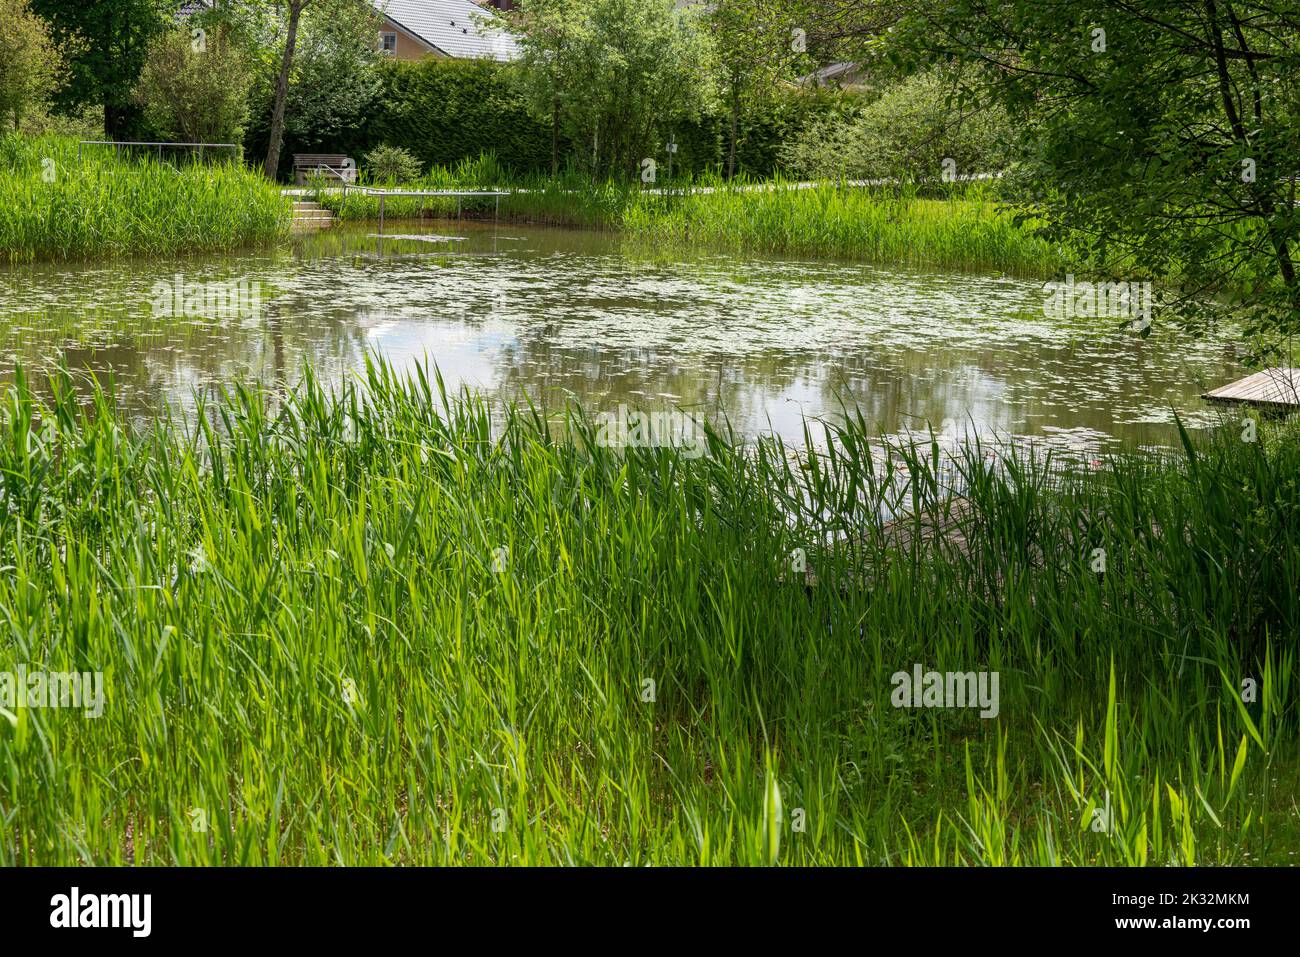 Garden pond with aquatic plants and water and lots of vegetation in green nature Stock Photo